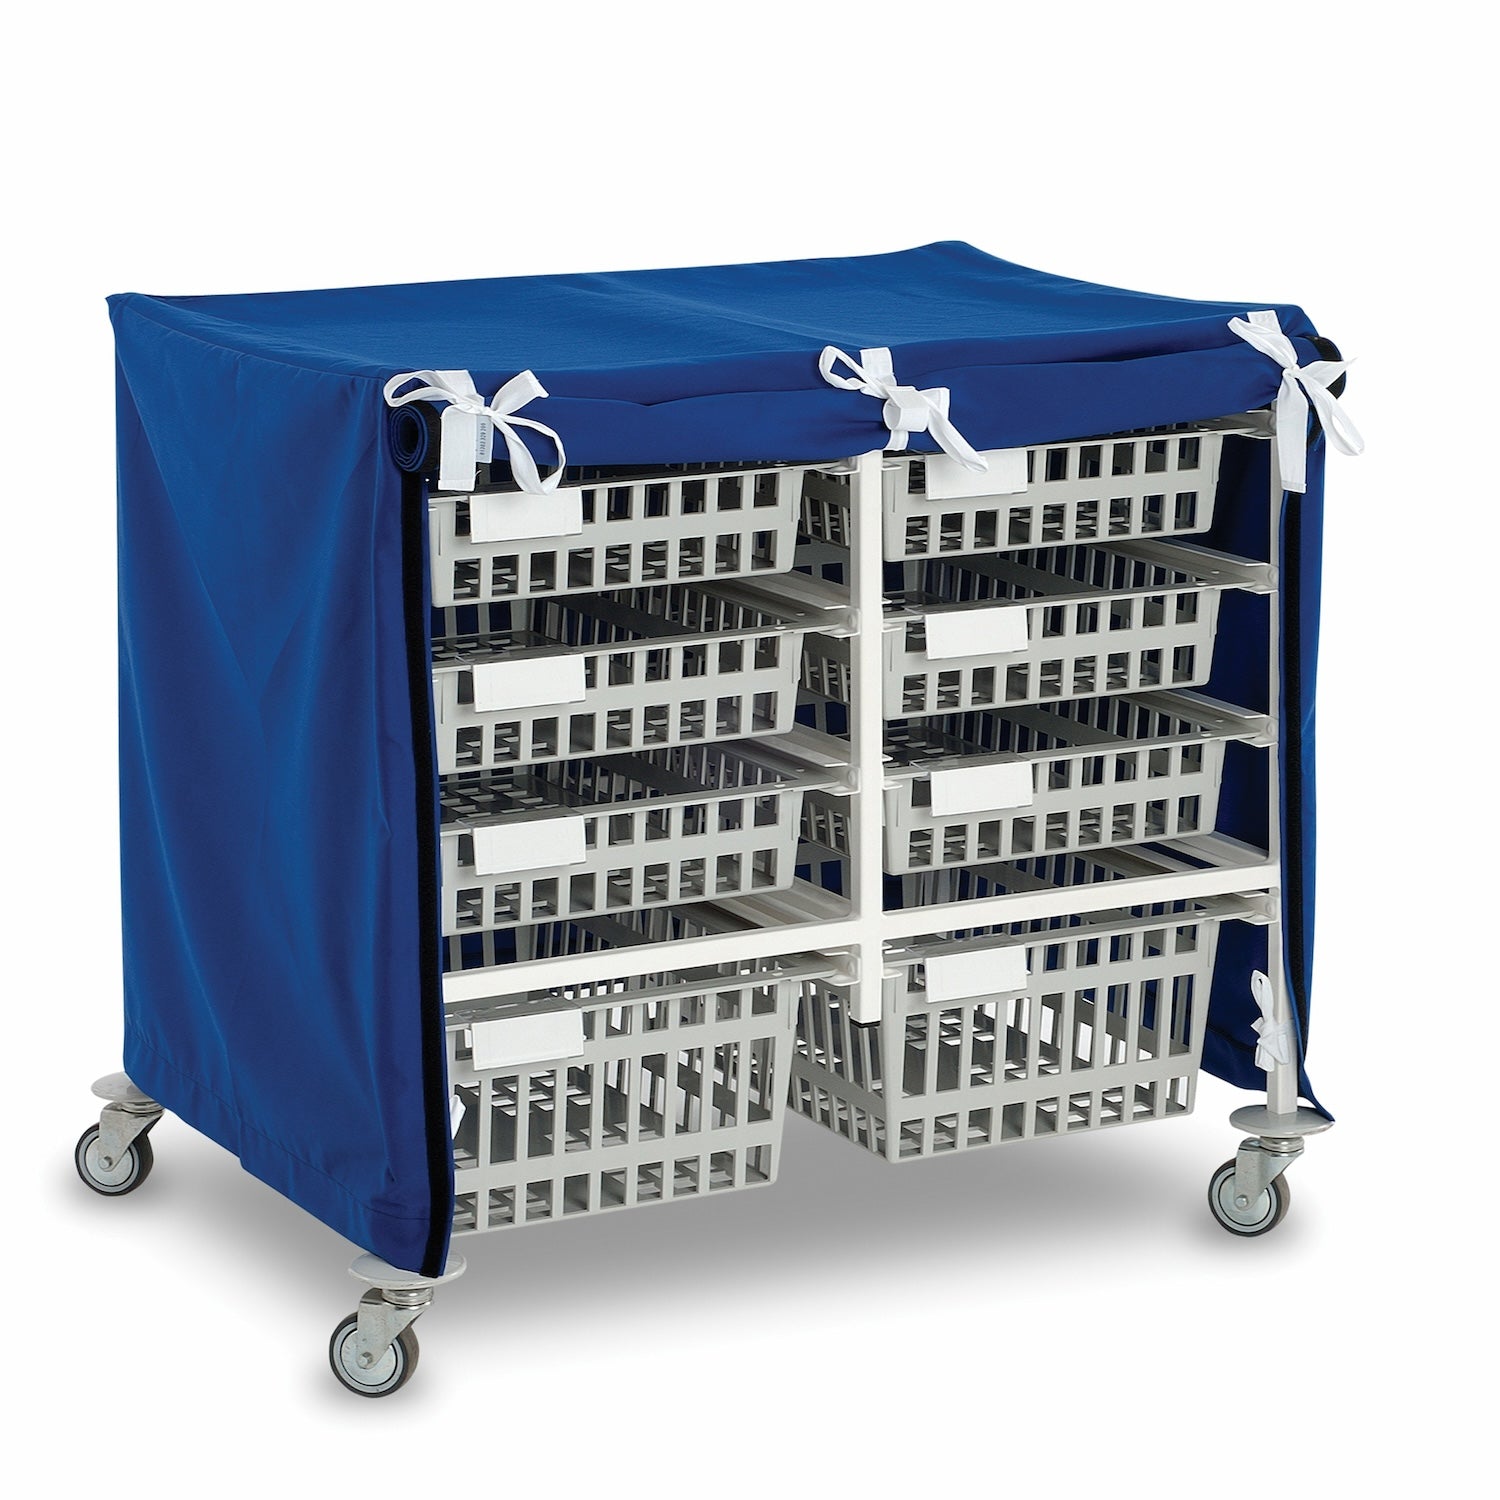 Trolley Covers | Small Half Section | 840H x 350W x 445D mm (1)